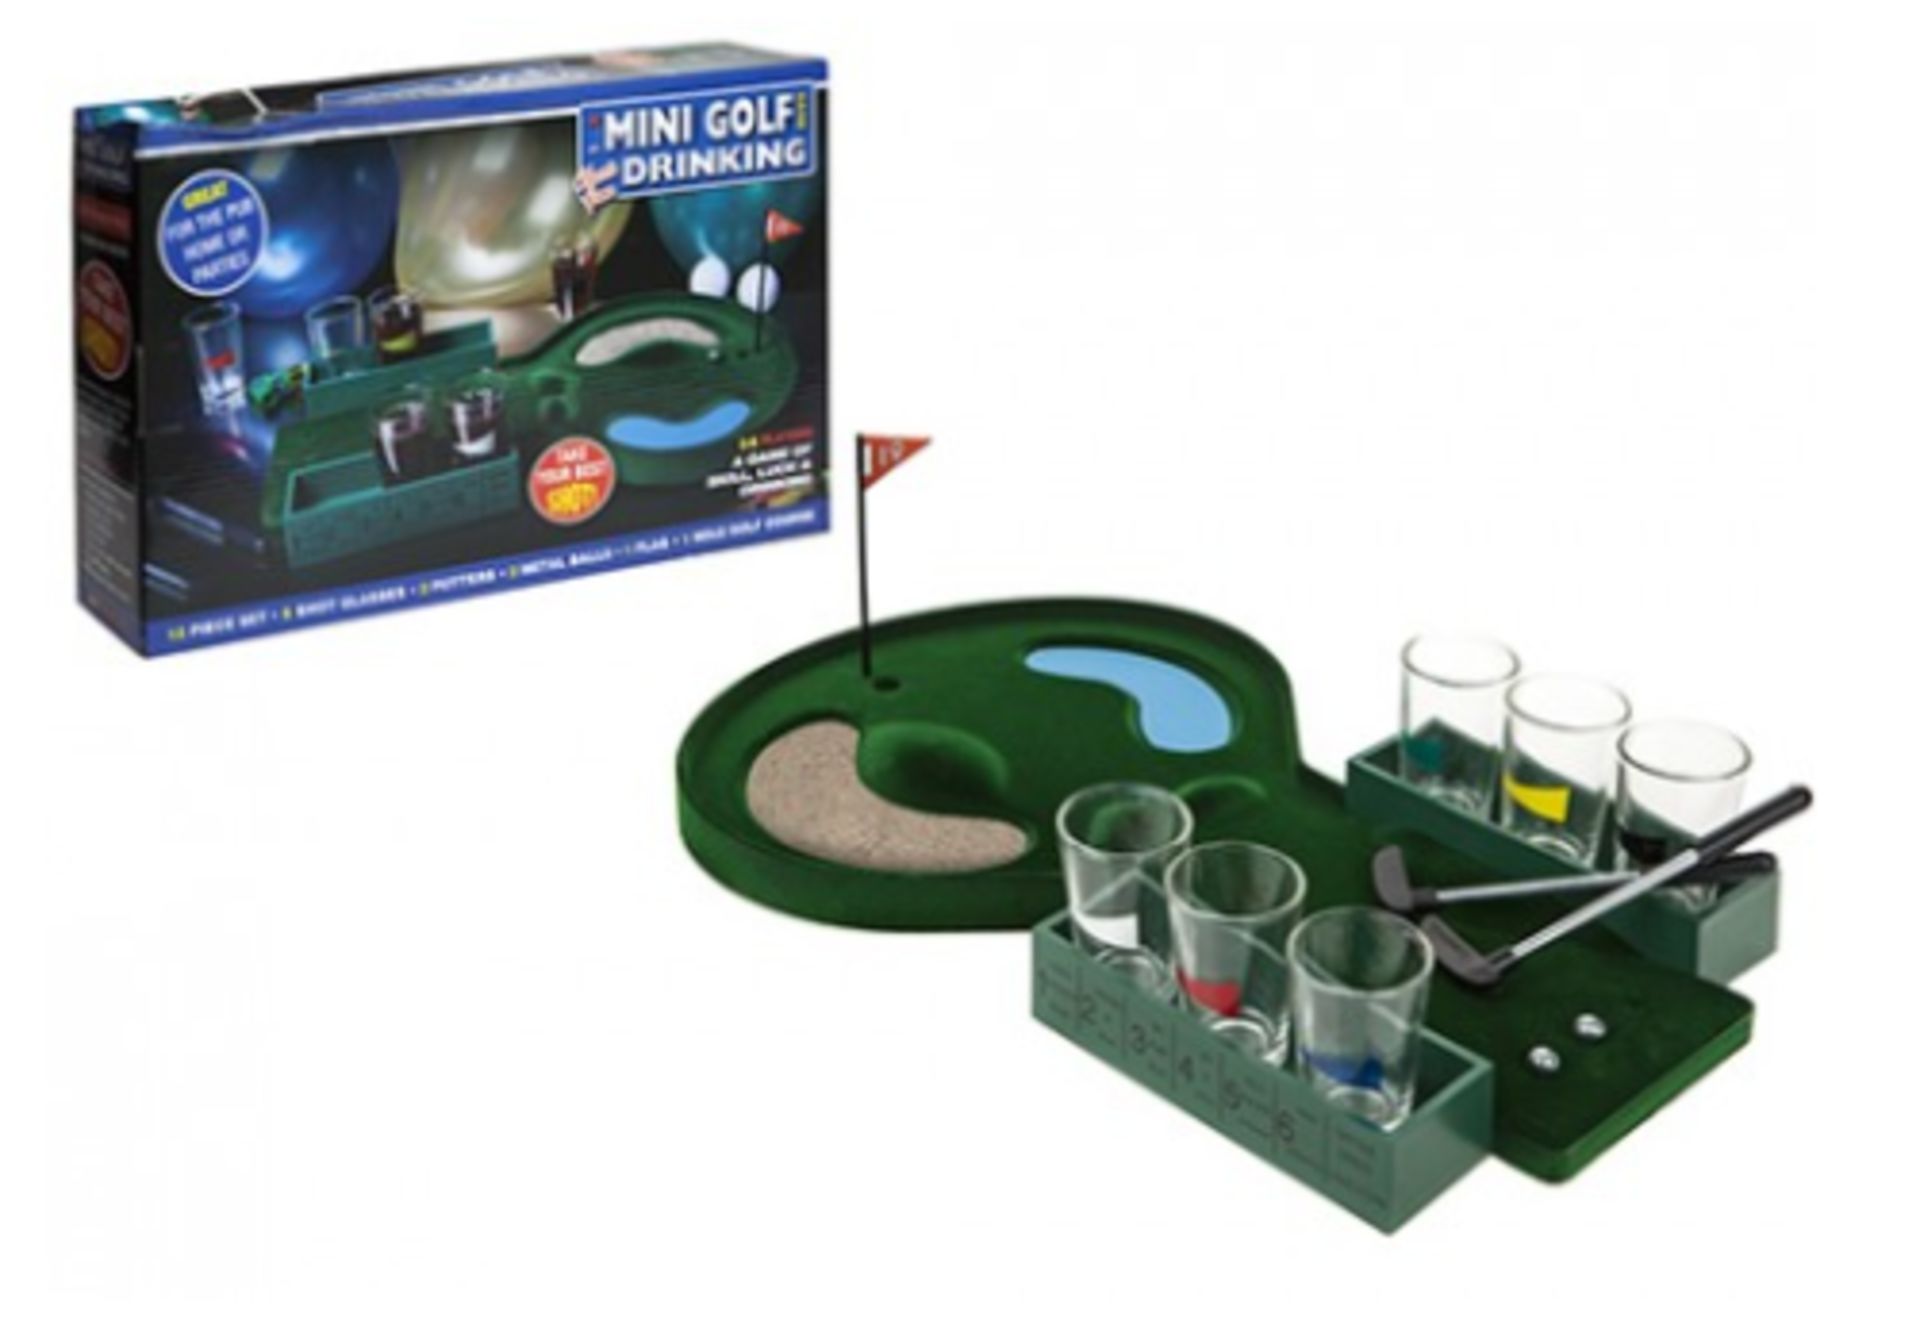 V Brand New 12 Piece Mini Golf Drinking Game - With 6 Shot Glasses - 2 Putters - 2 Metal Balls - 1